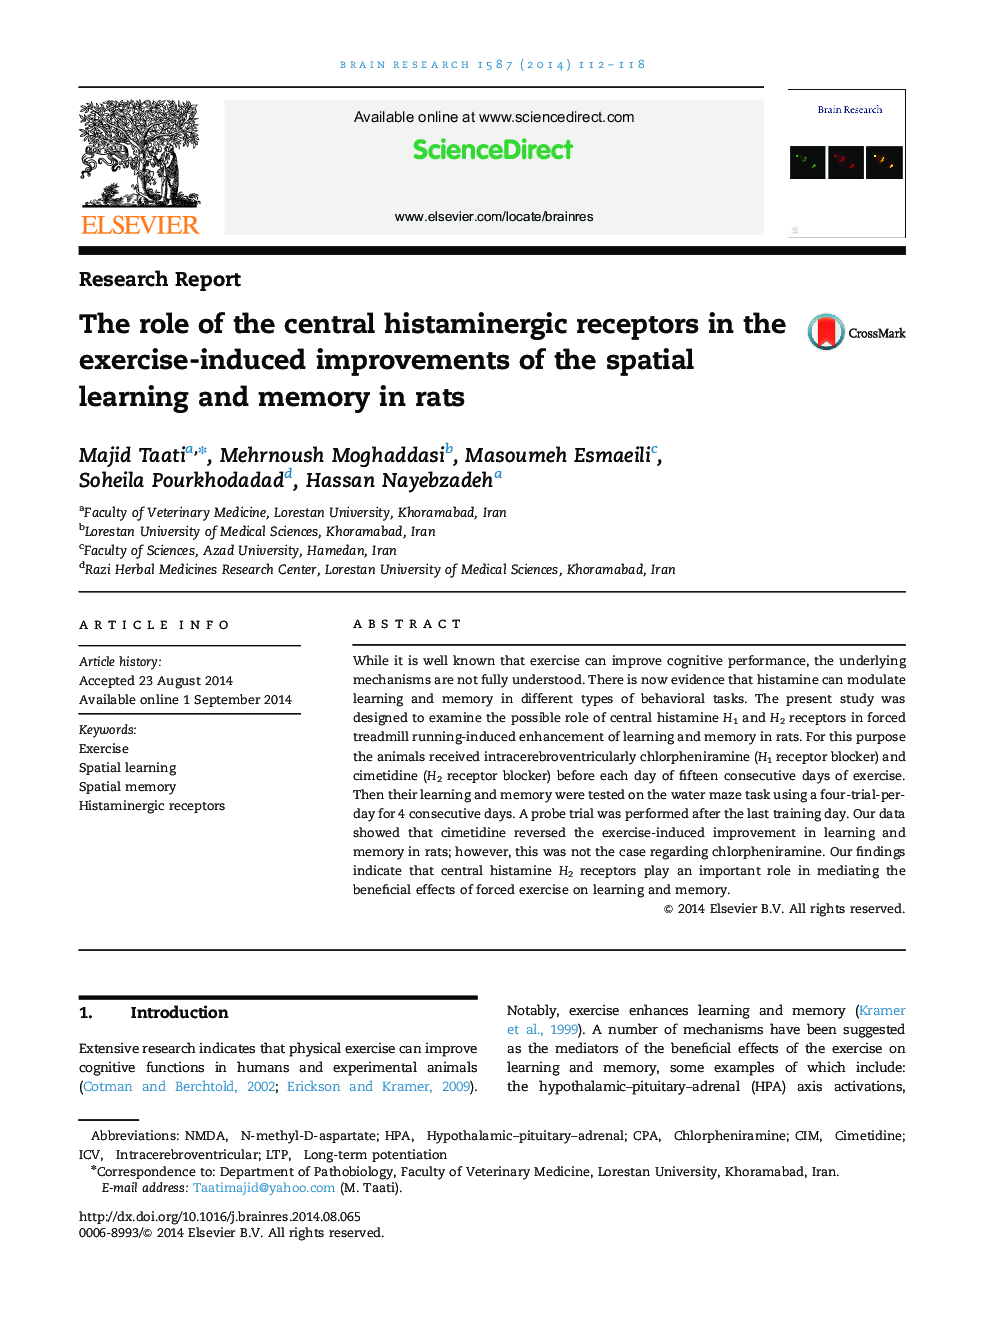 Research ReportThe role of the central histaminergic receptors in the exercise-induced improvements of the spatial learning and memory in rats